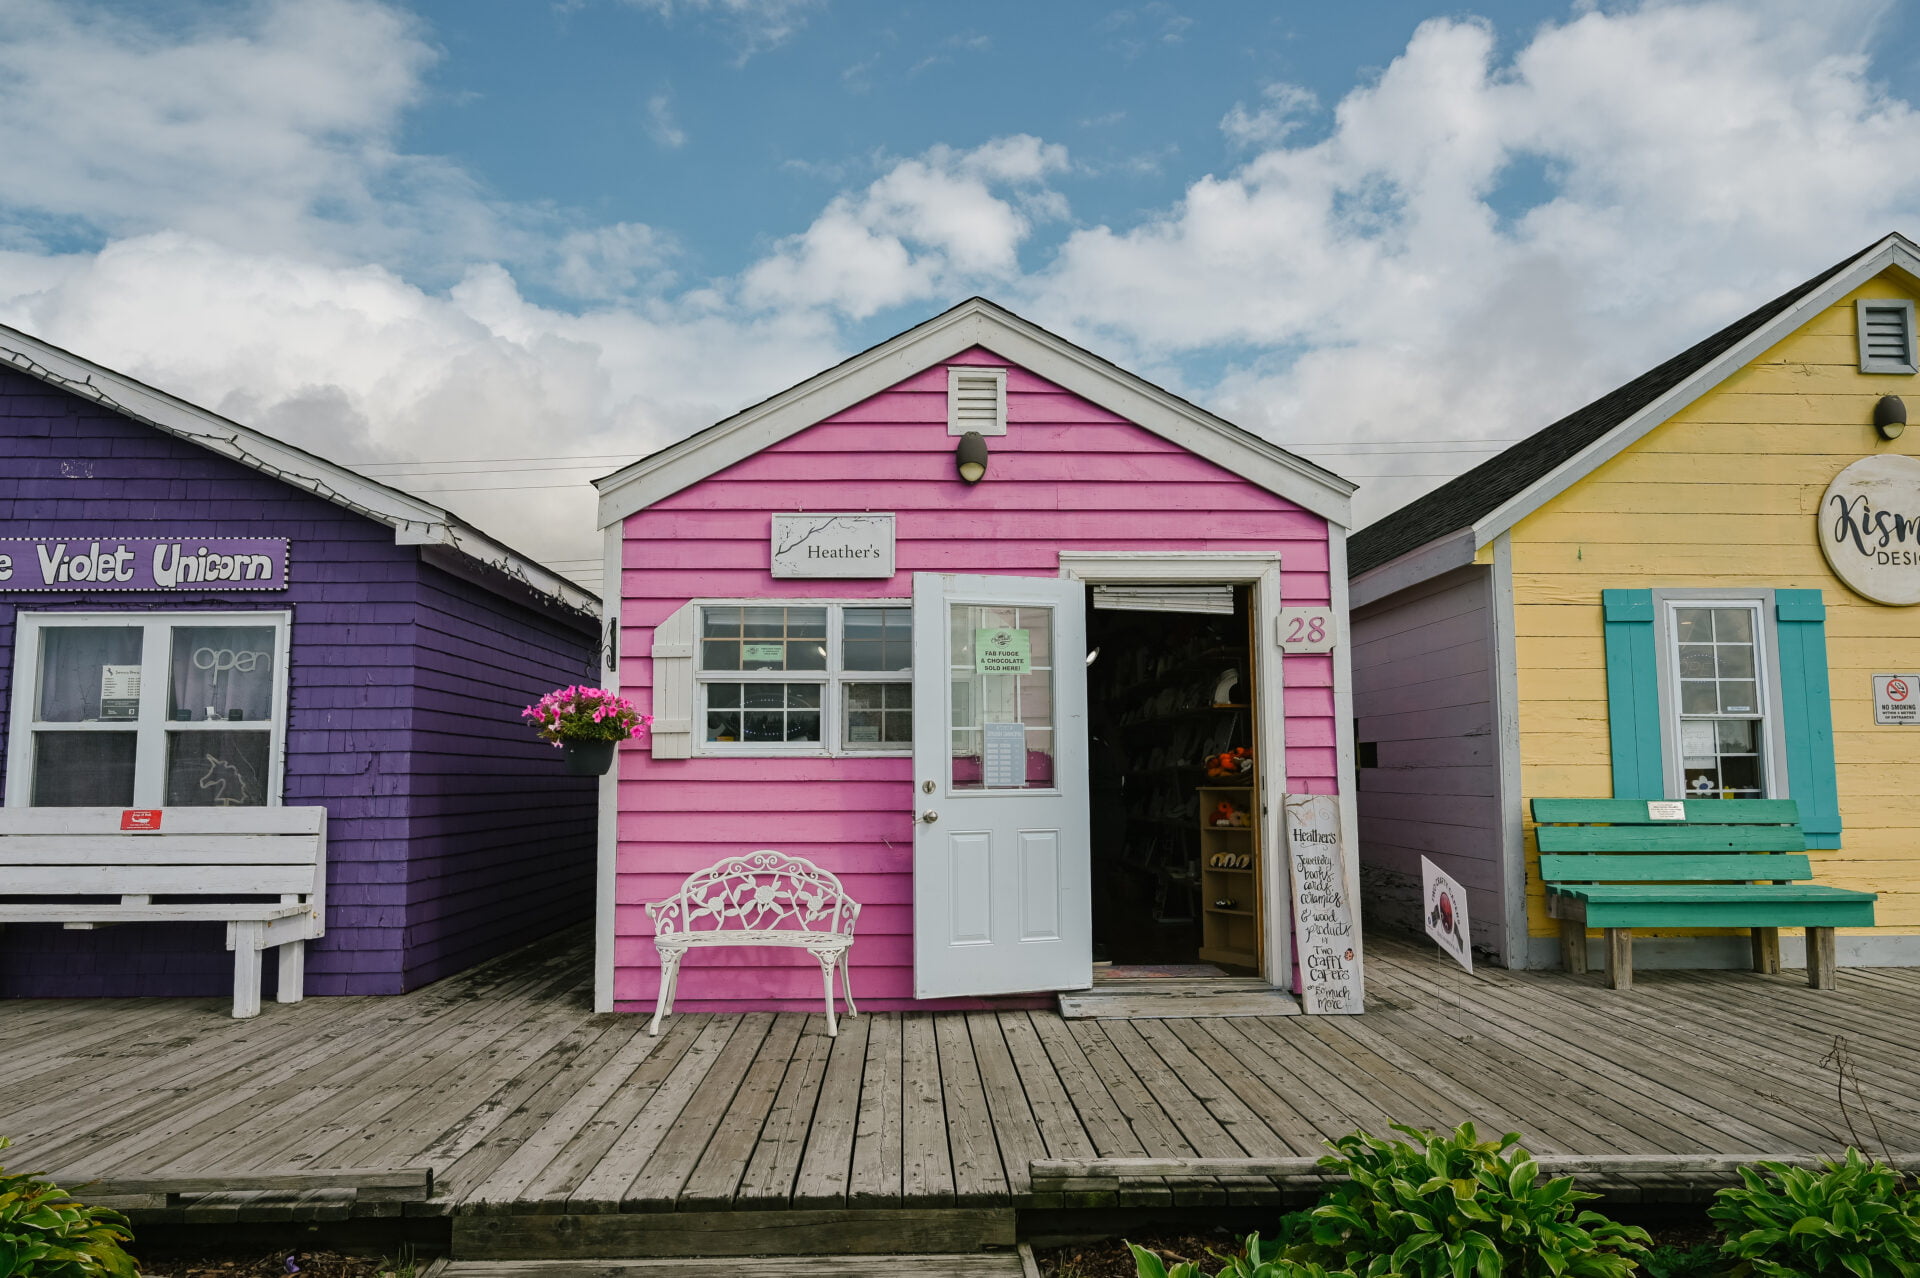 small pink shop between a purple and yellow shop on the boardwalk in fisherman's cove nova scotia